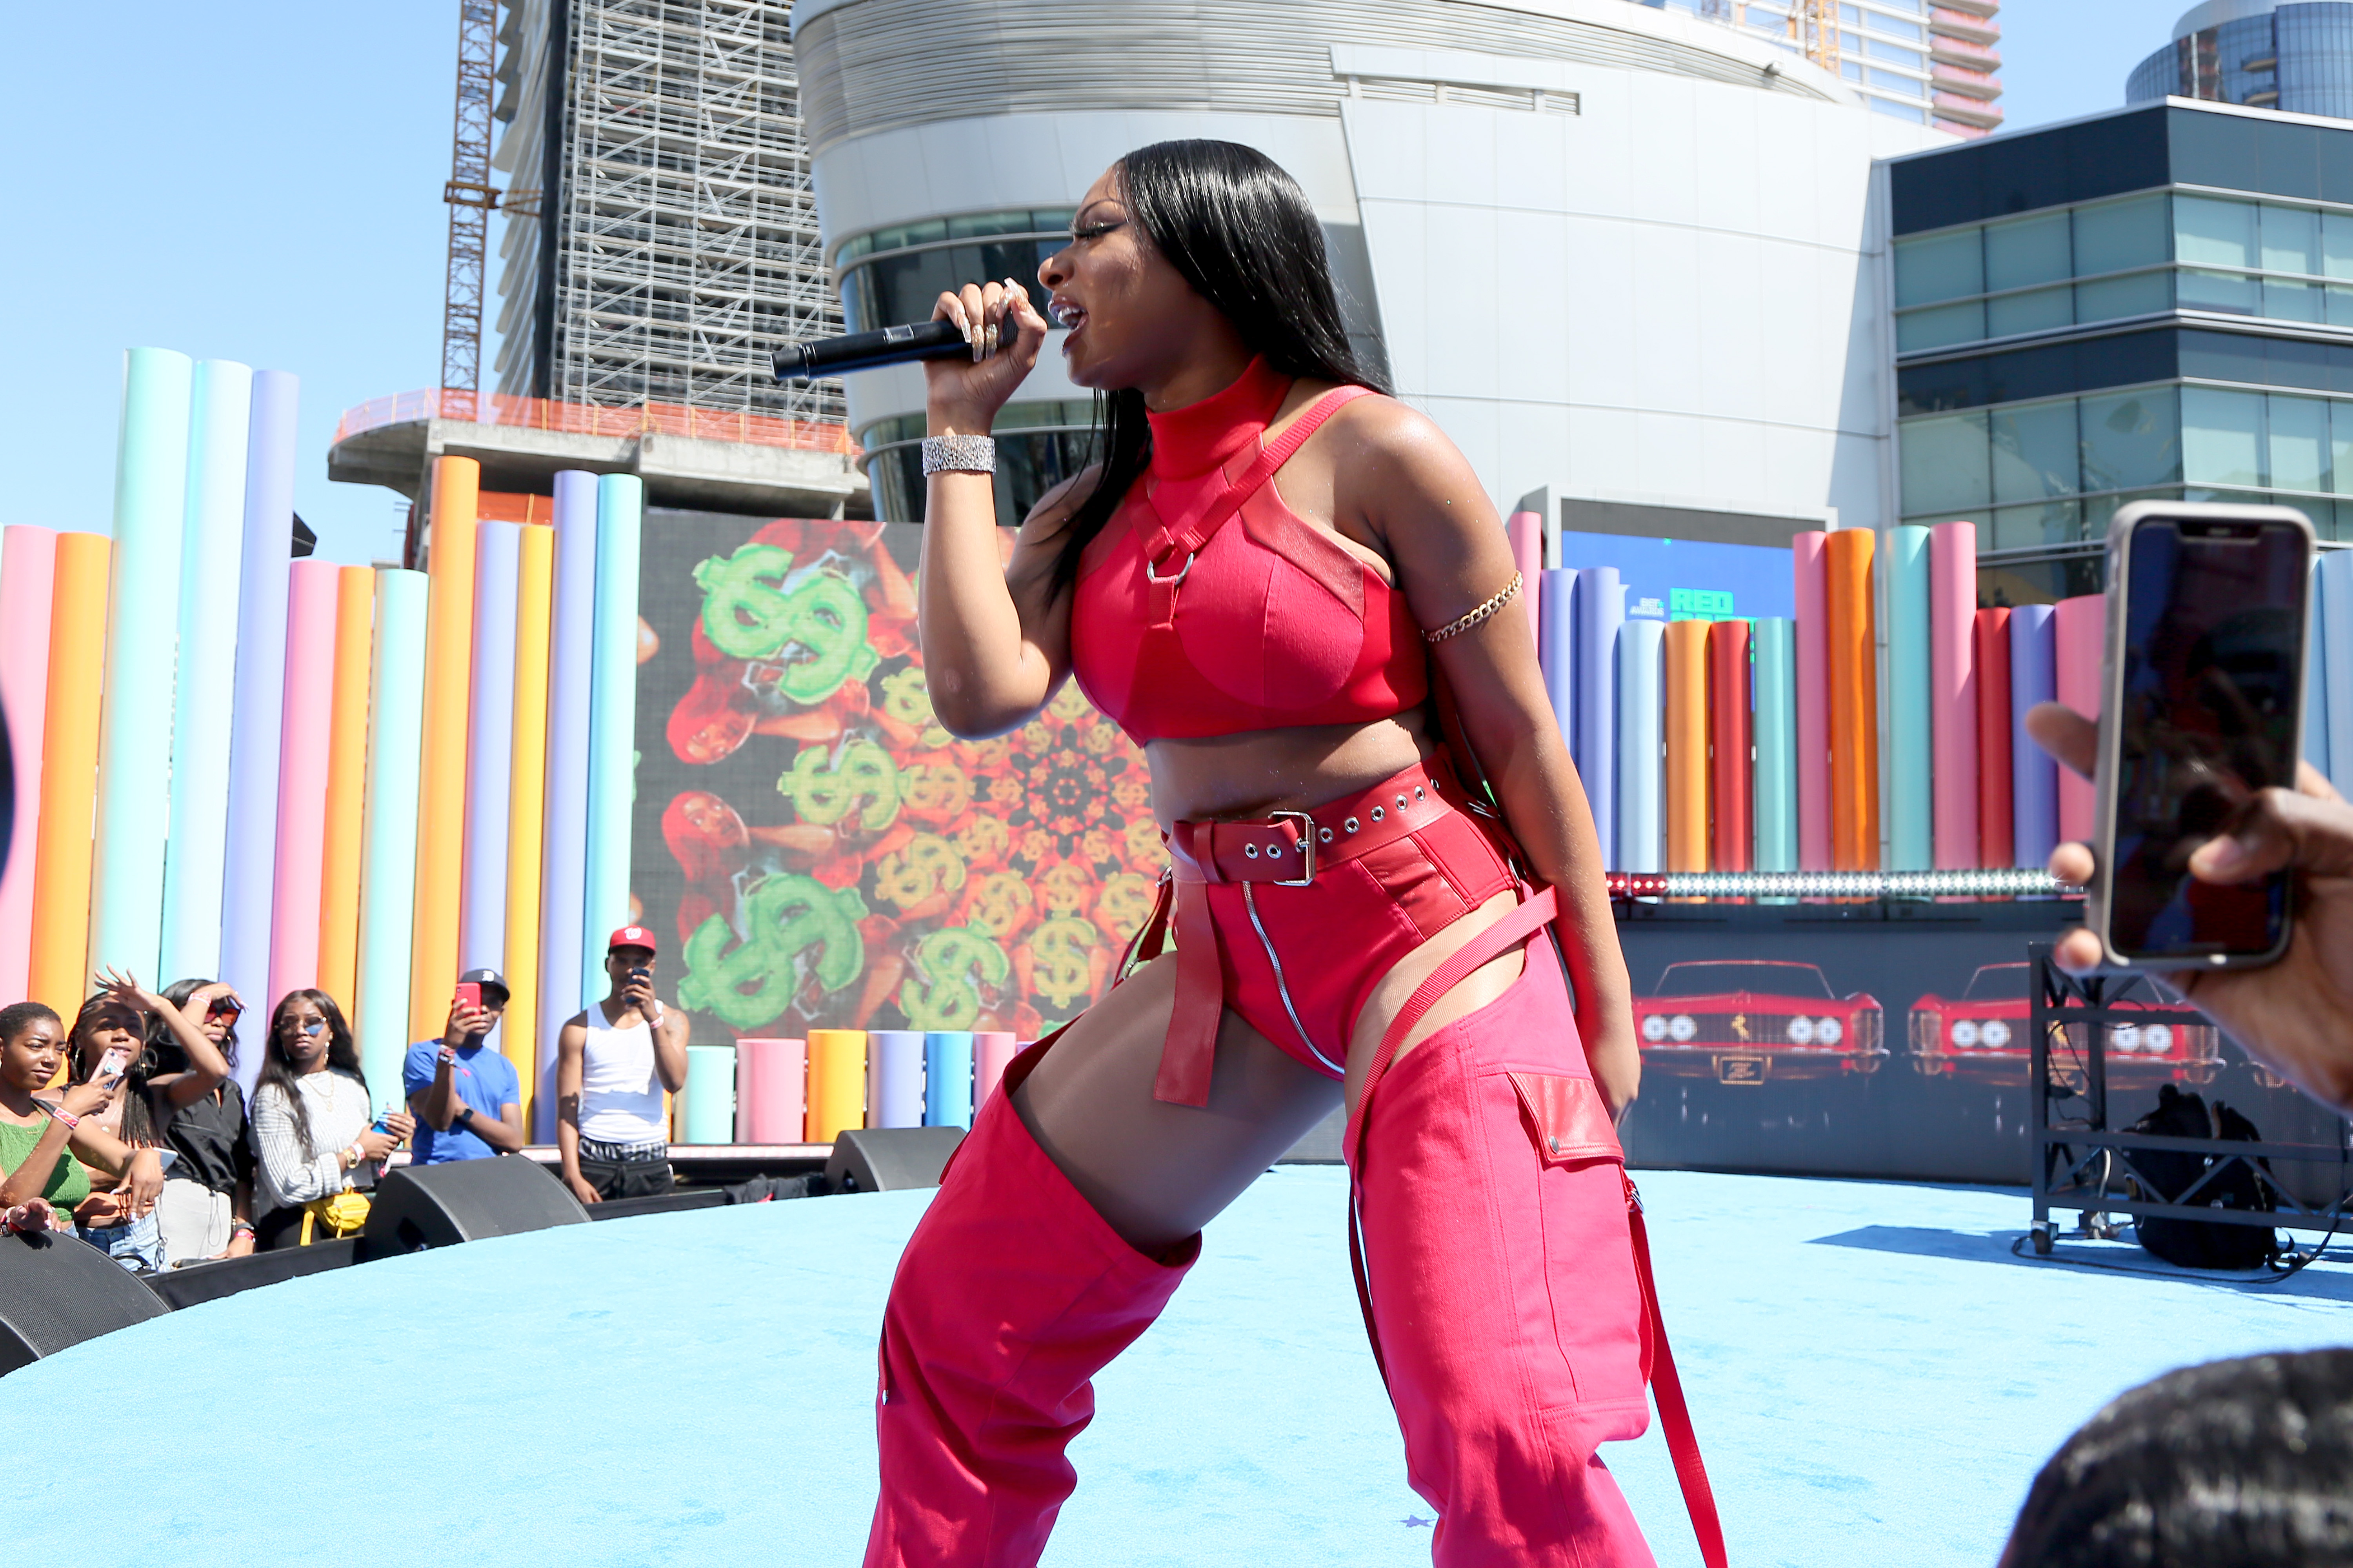 Megan Thee Stallion on Hot Girl Summer, the 'Cash Sh--' video, and